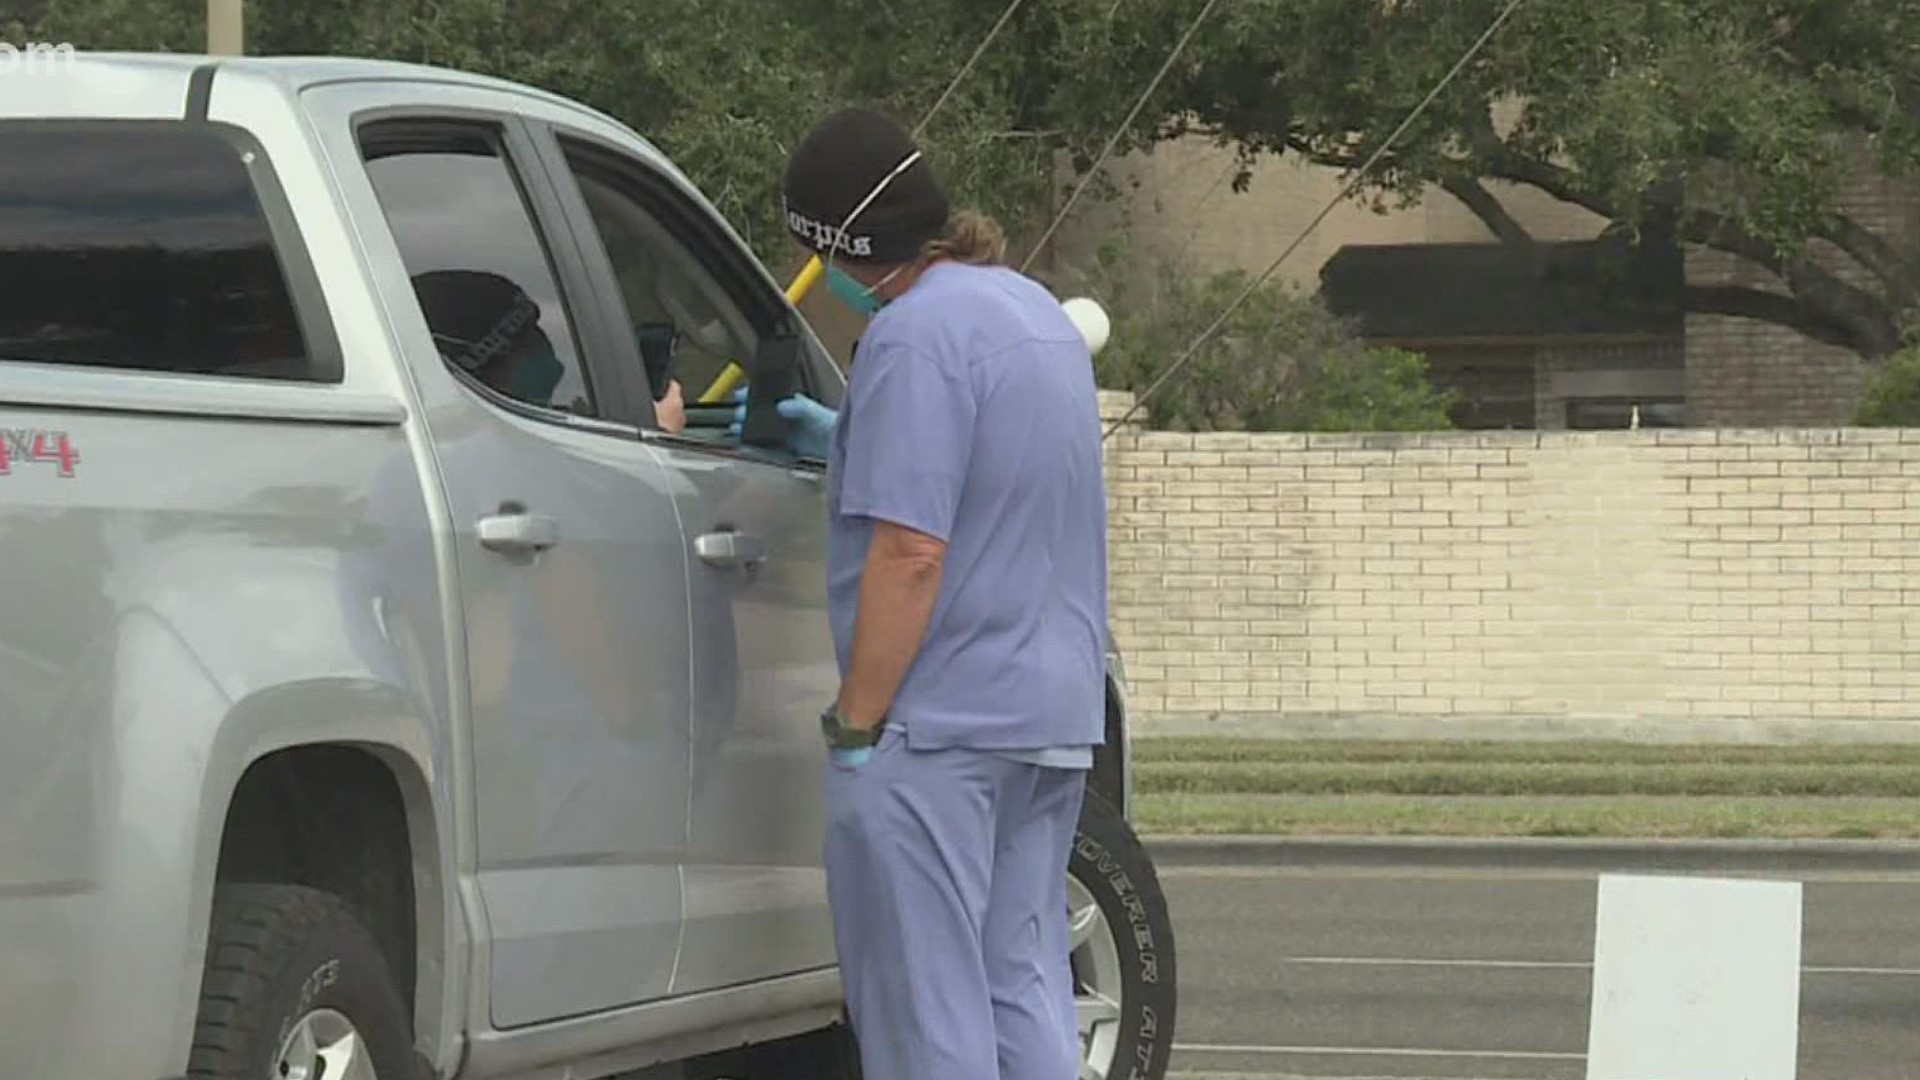 While many have been waiting hours for a rapid test in Corpus Christi, one location is giving free saliva testing with little wait time.